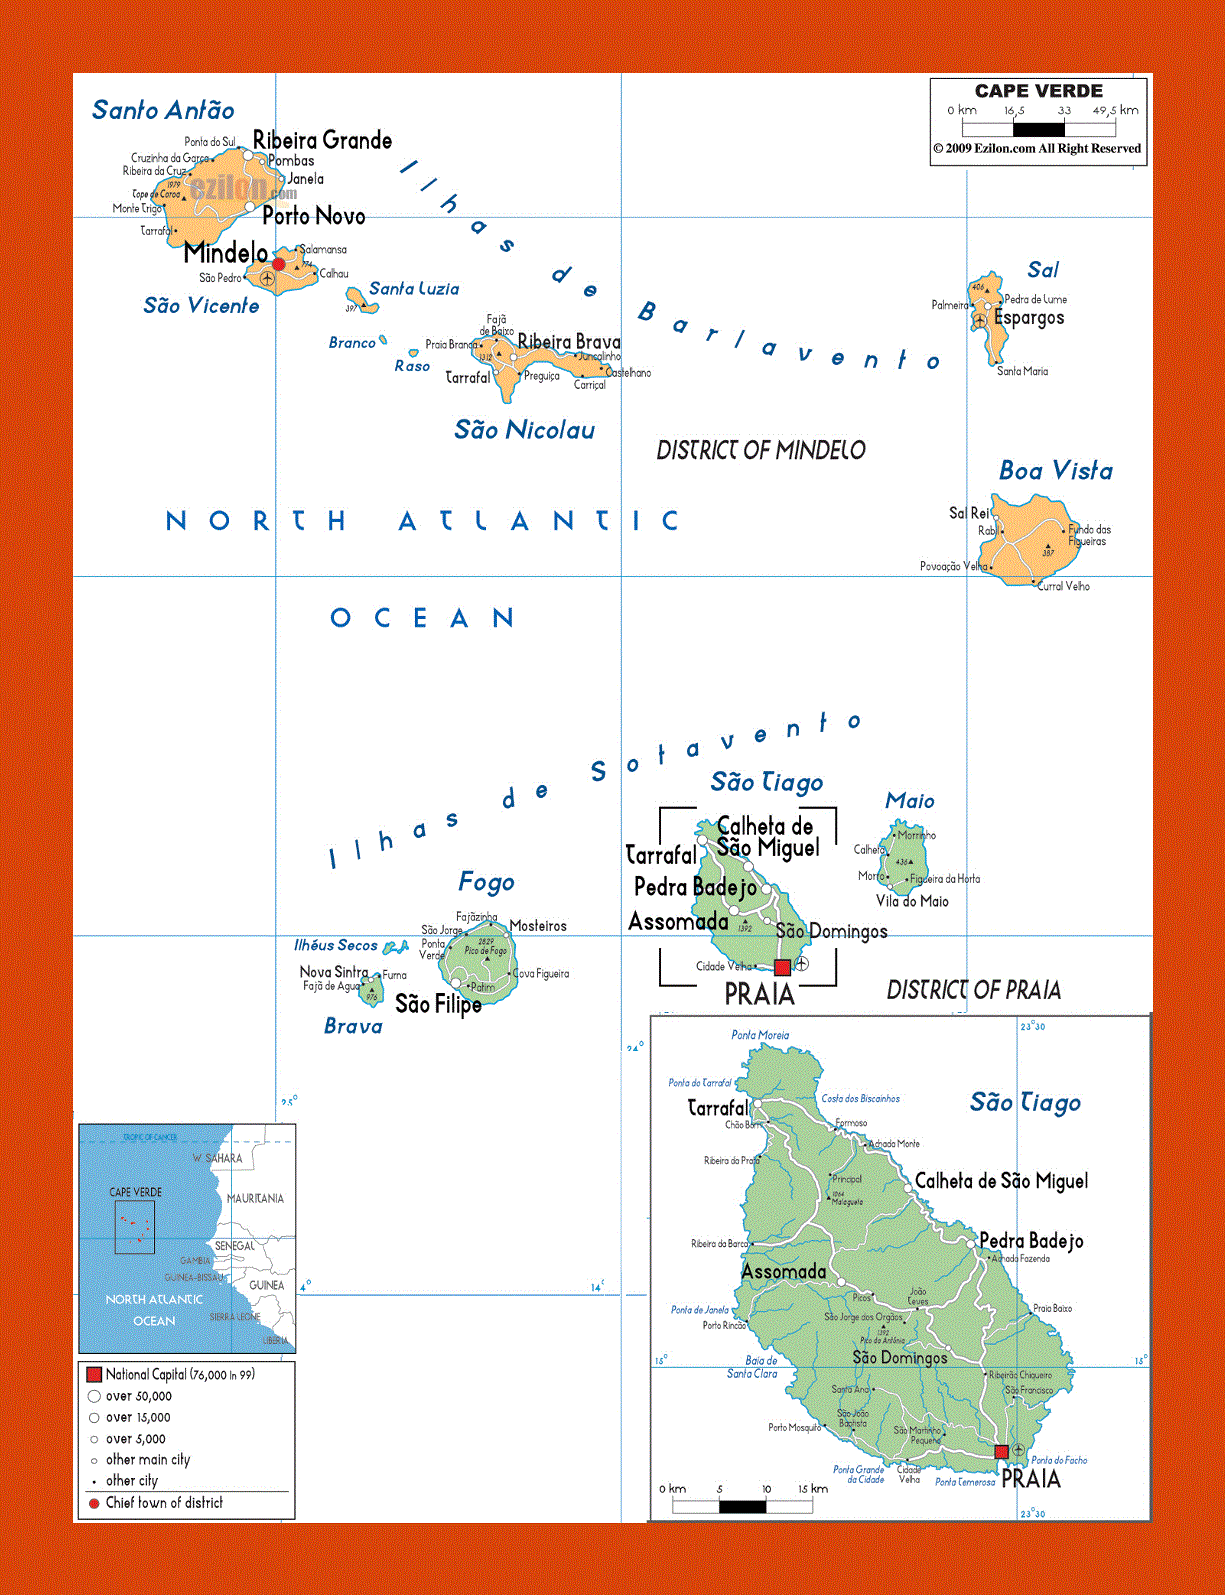 Political and administrative map of Cape Verde